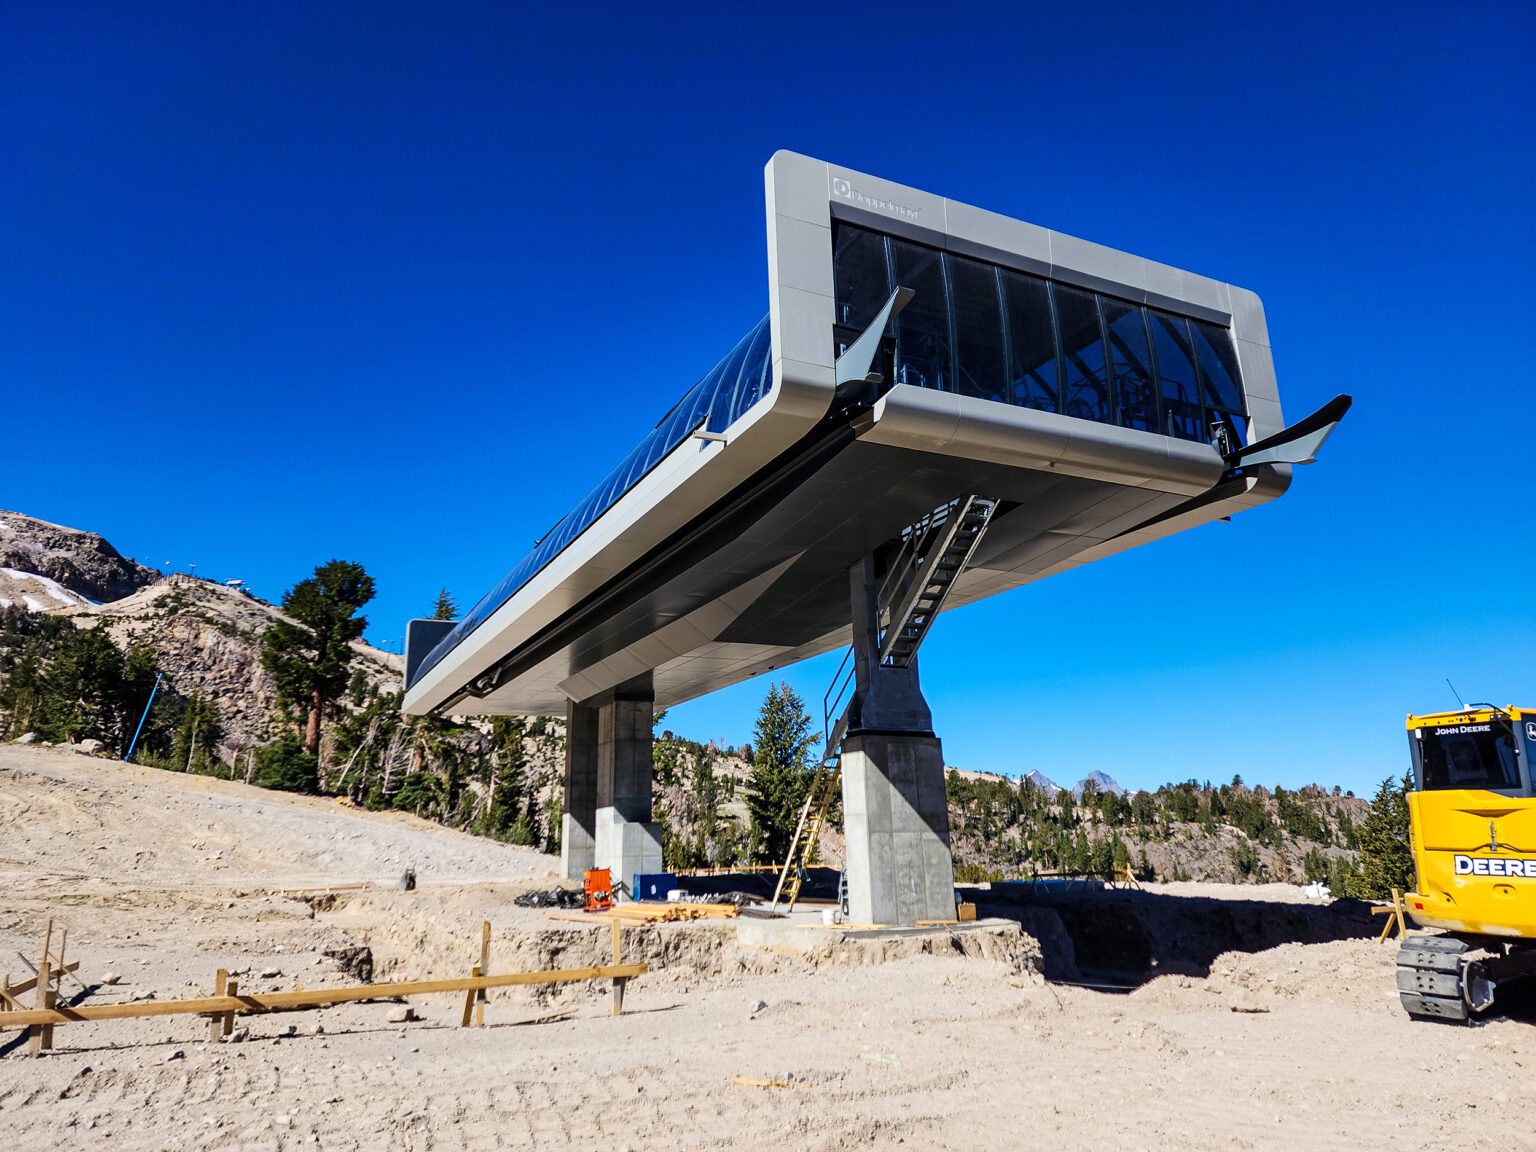 New Top Station for Chair 16